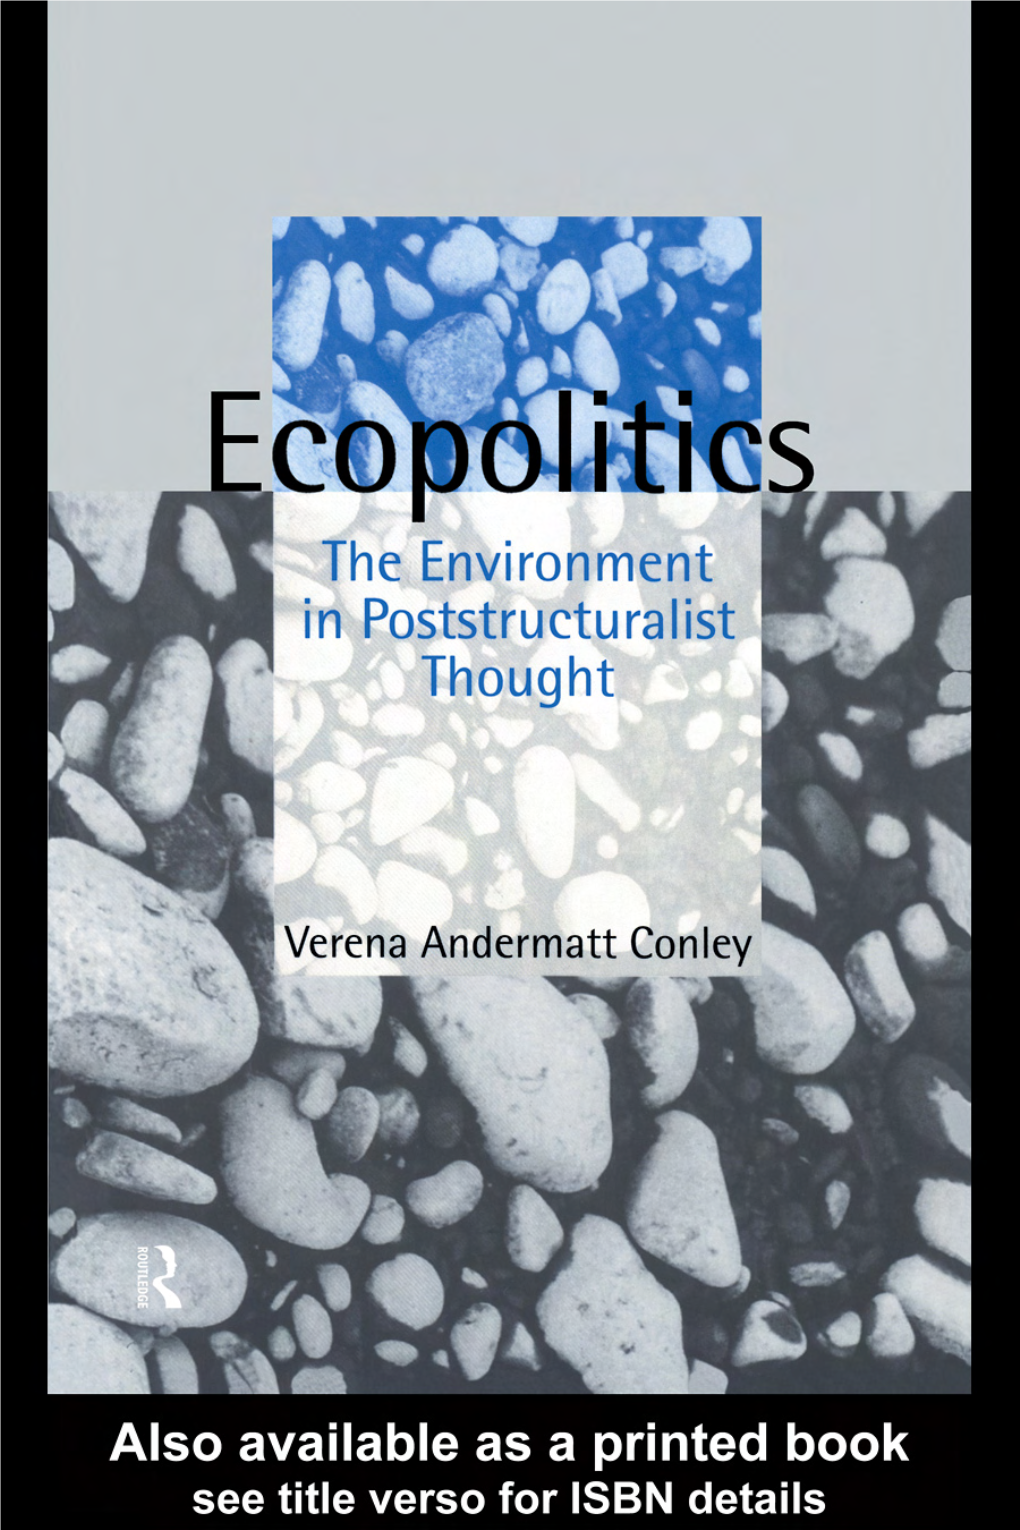 Ecopolitics: the Environment in Poststructuralist Thought